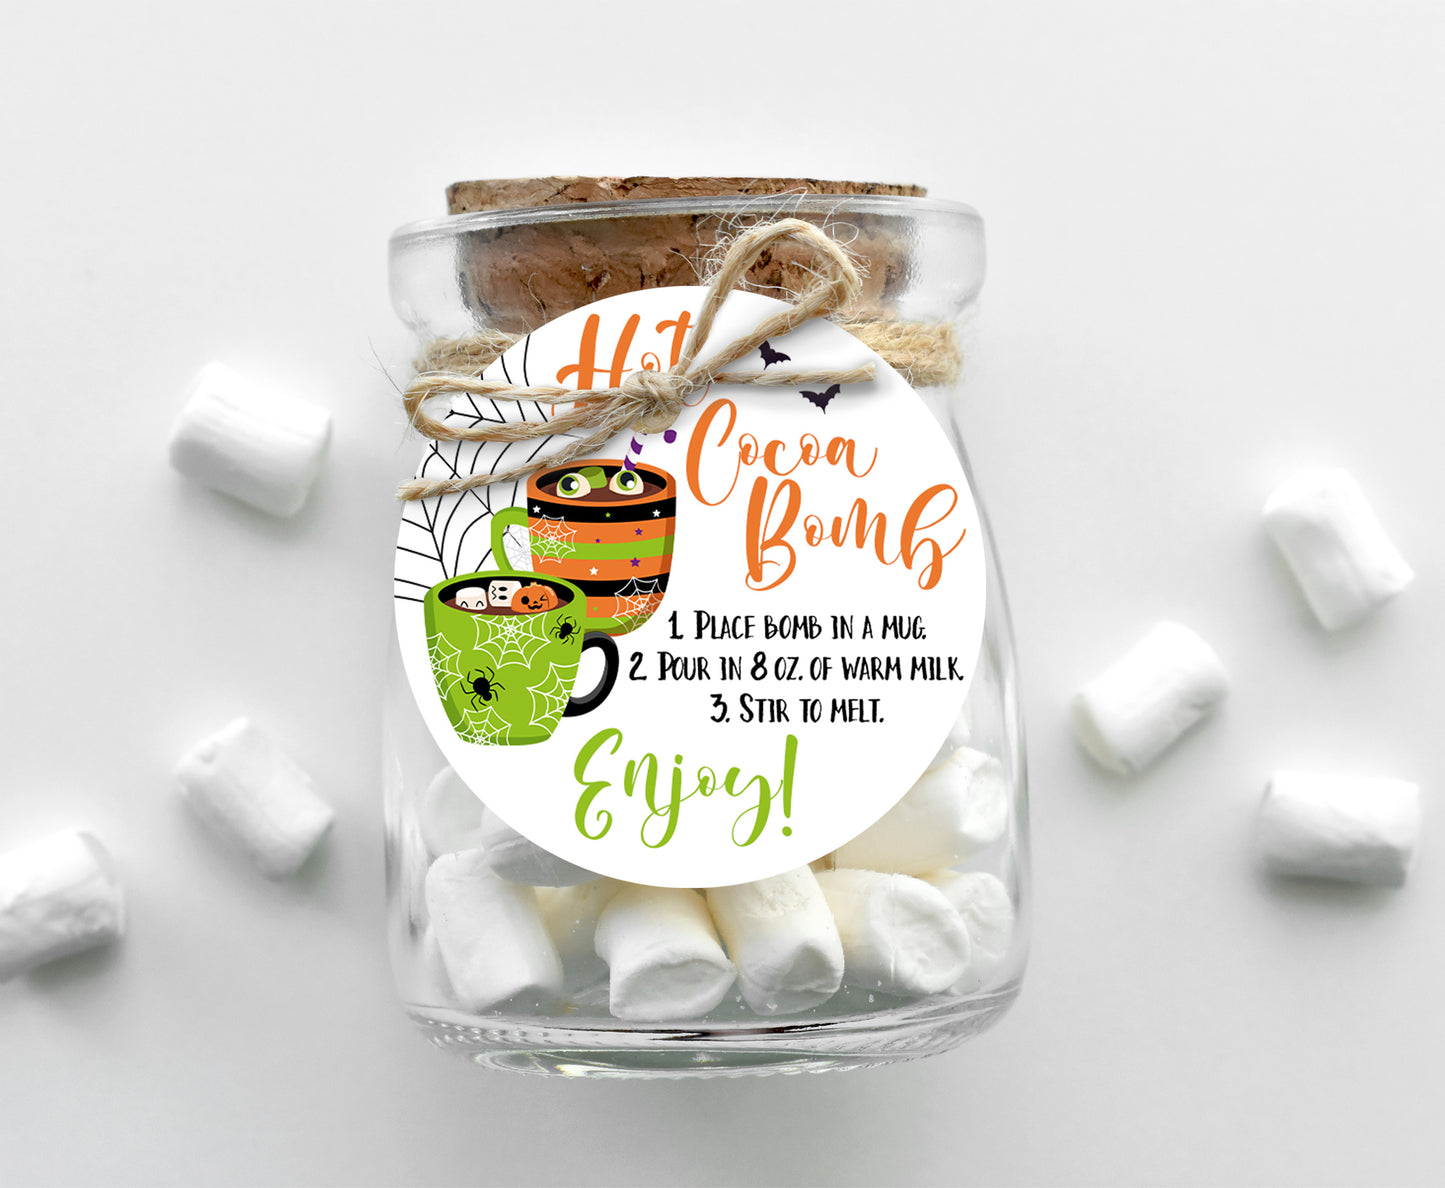 Hot Cocoa Bomb Tags 2"x2" | Halloween Favor Tags - 115